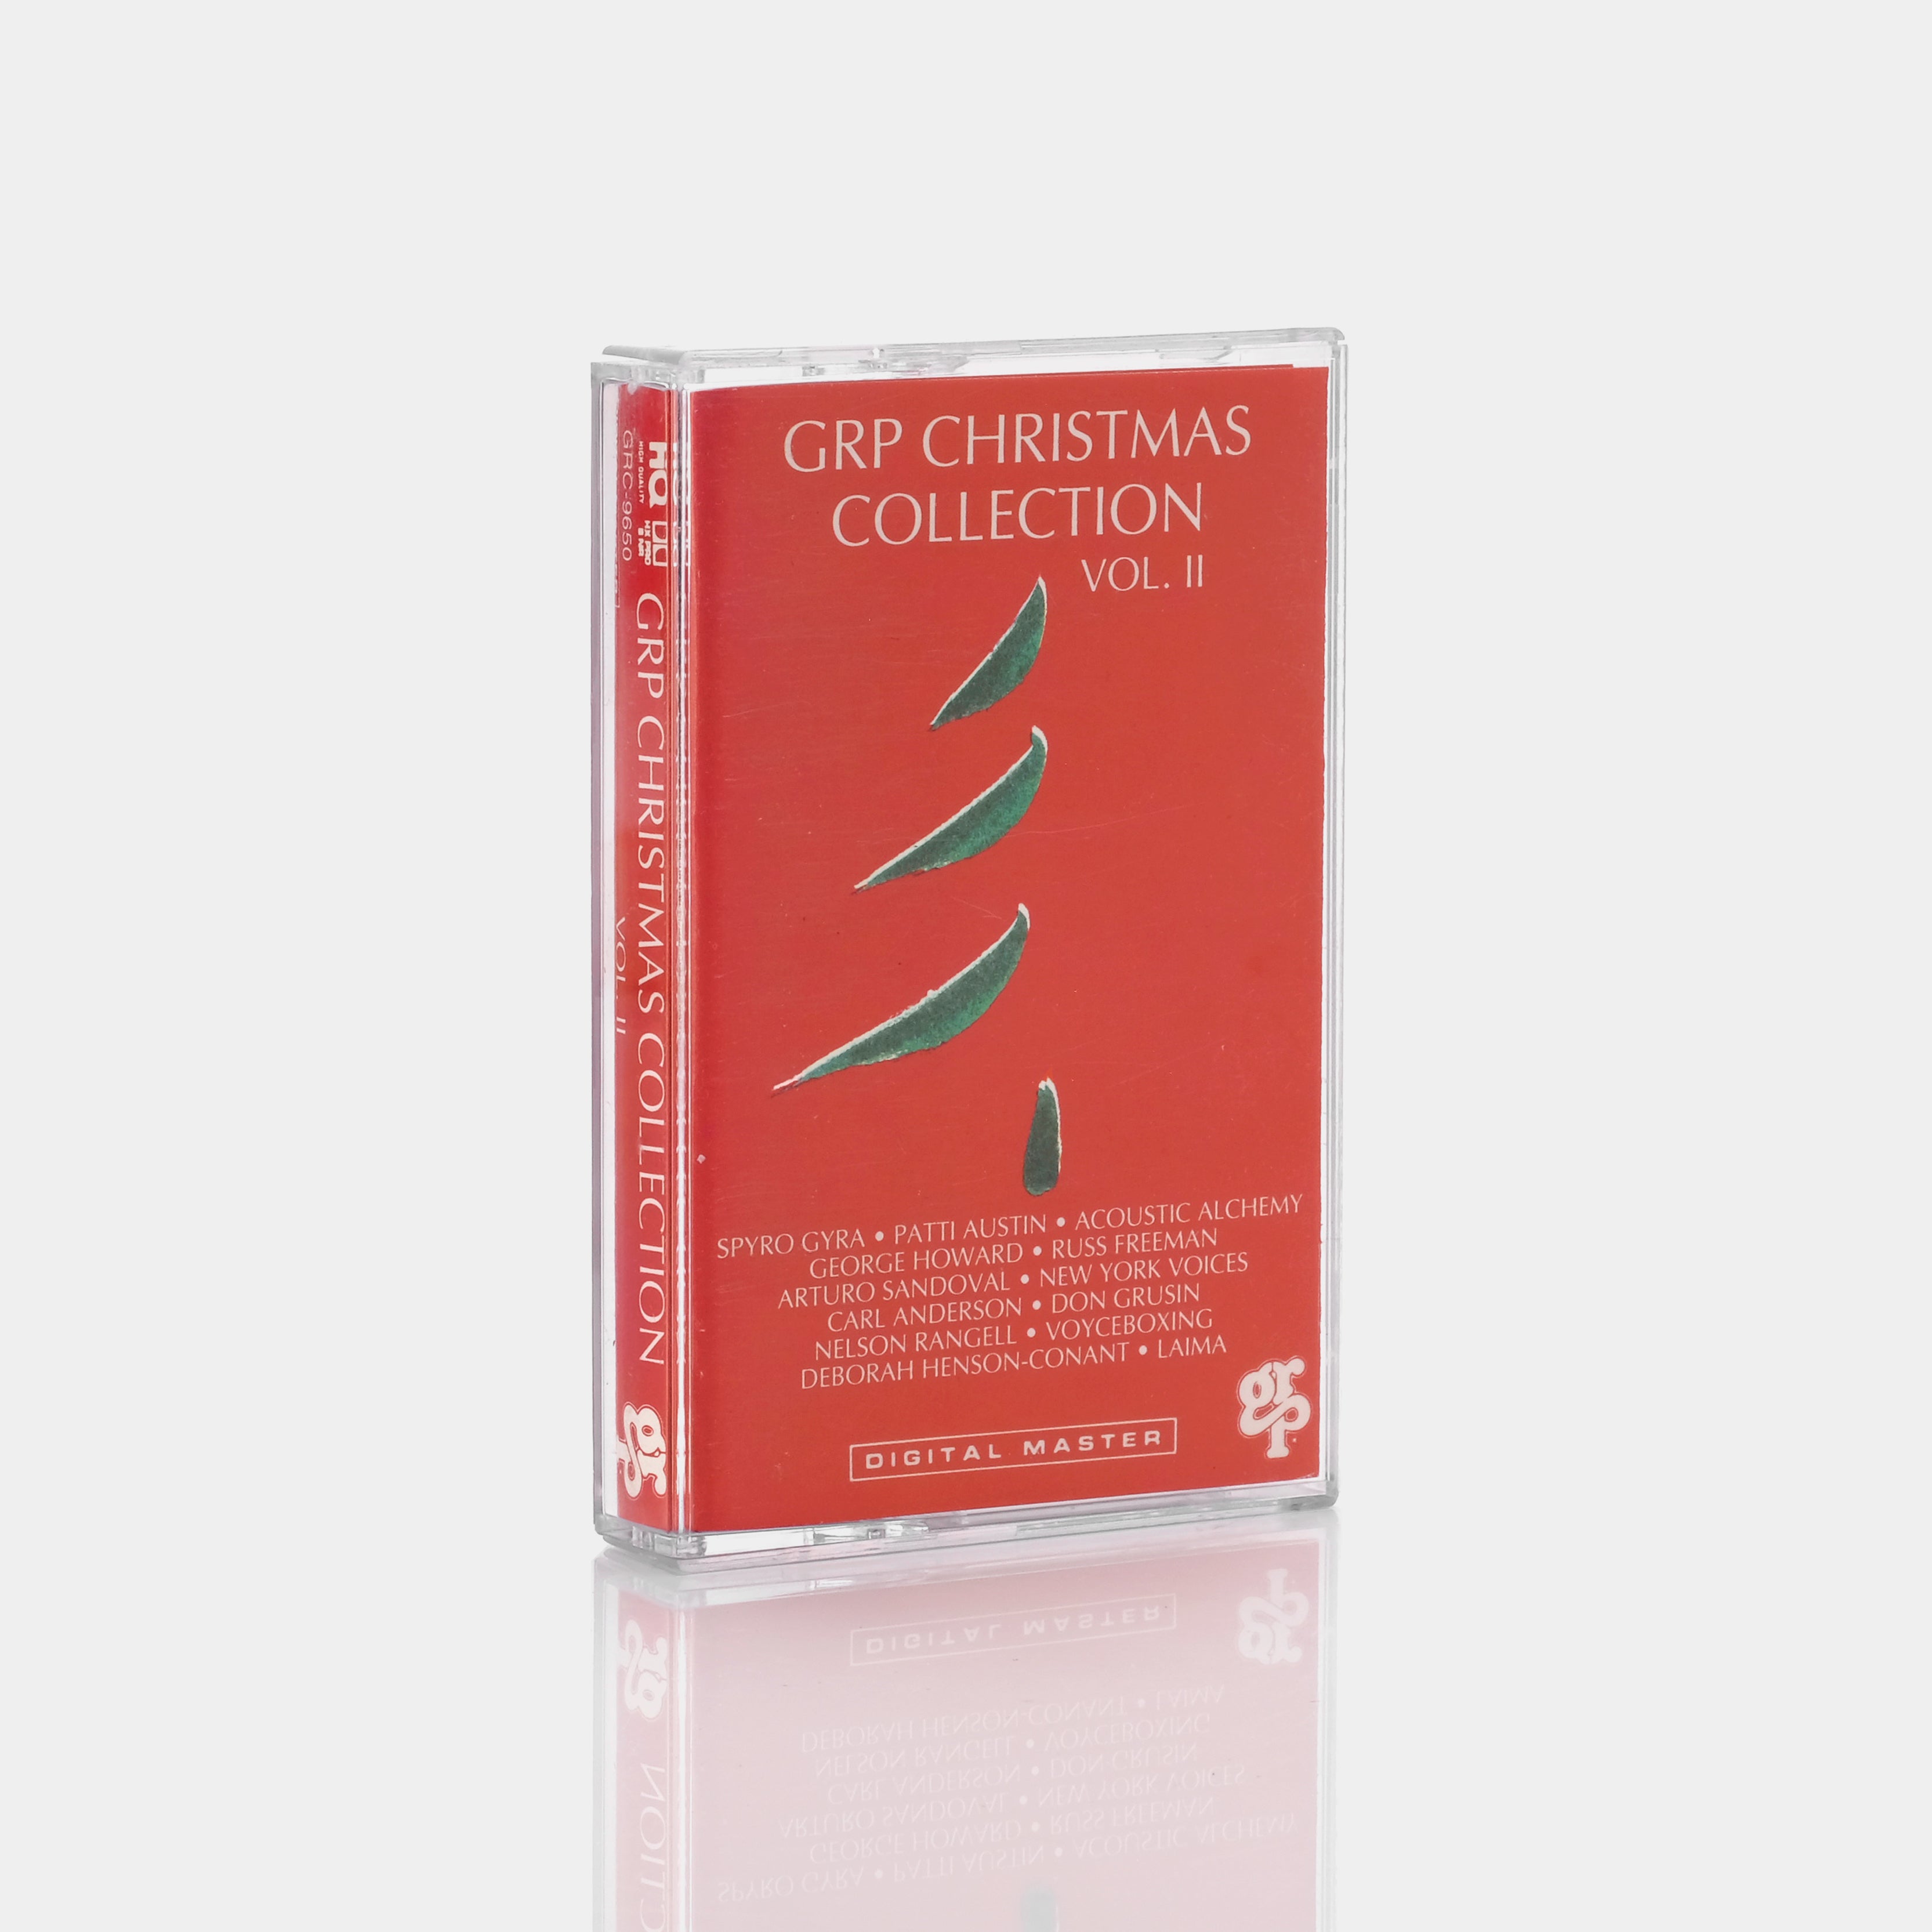 A GRP Christmas Collection Vol. II Cassette Tape